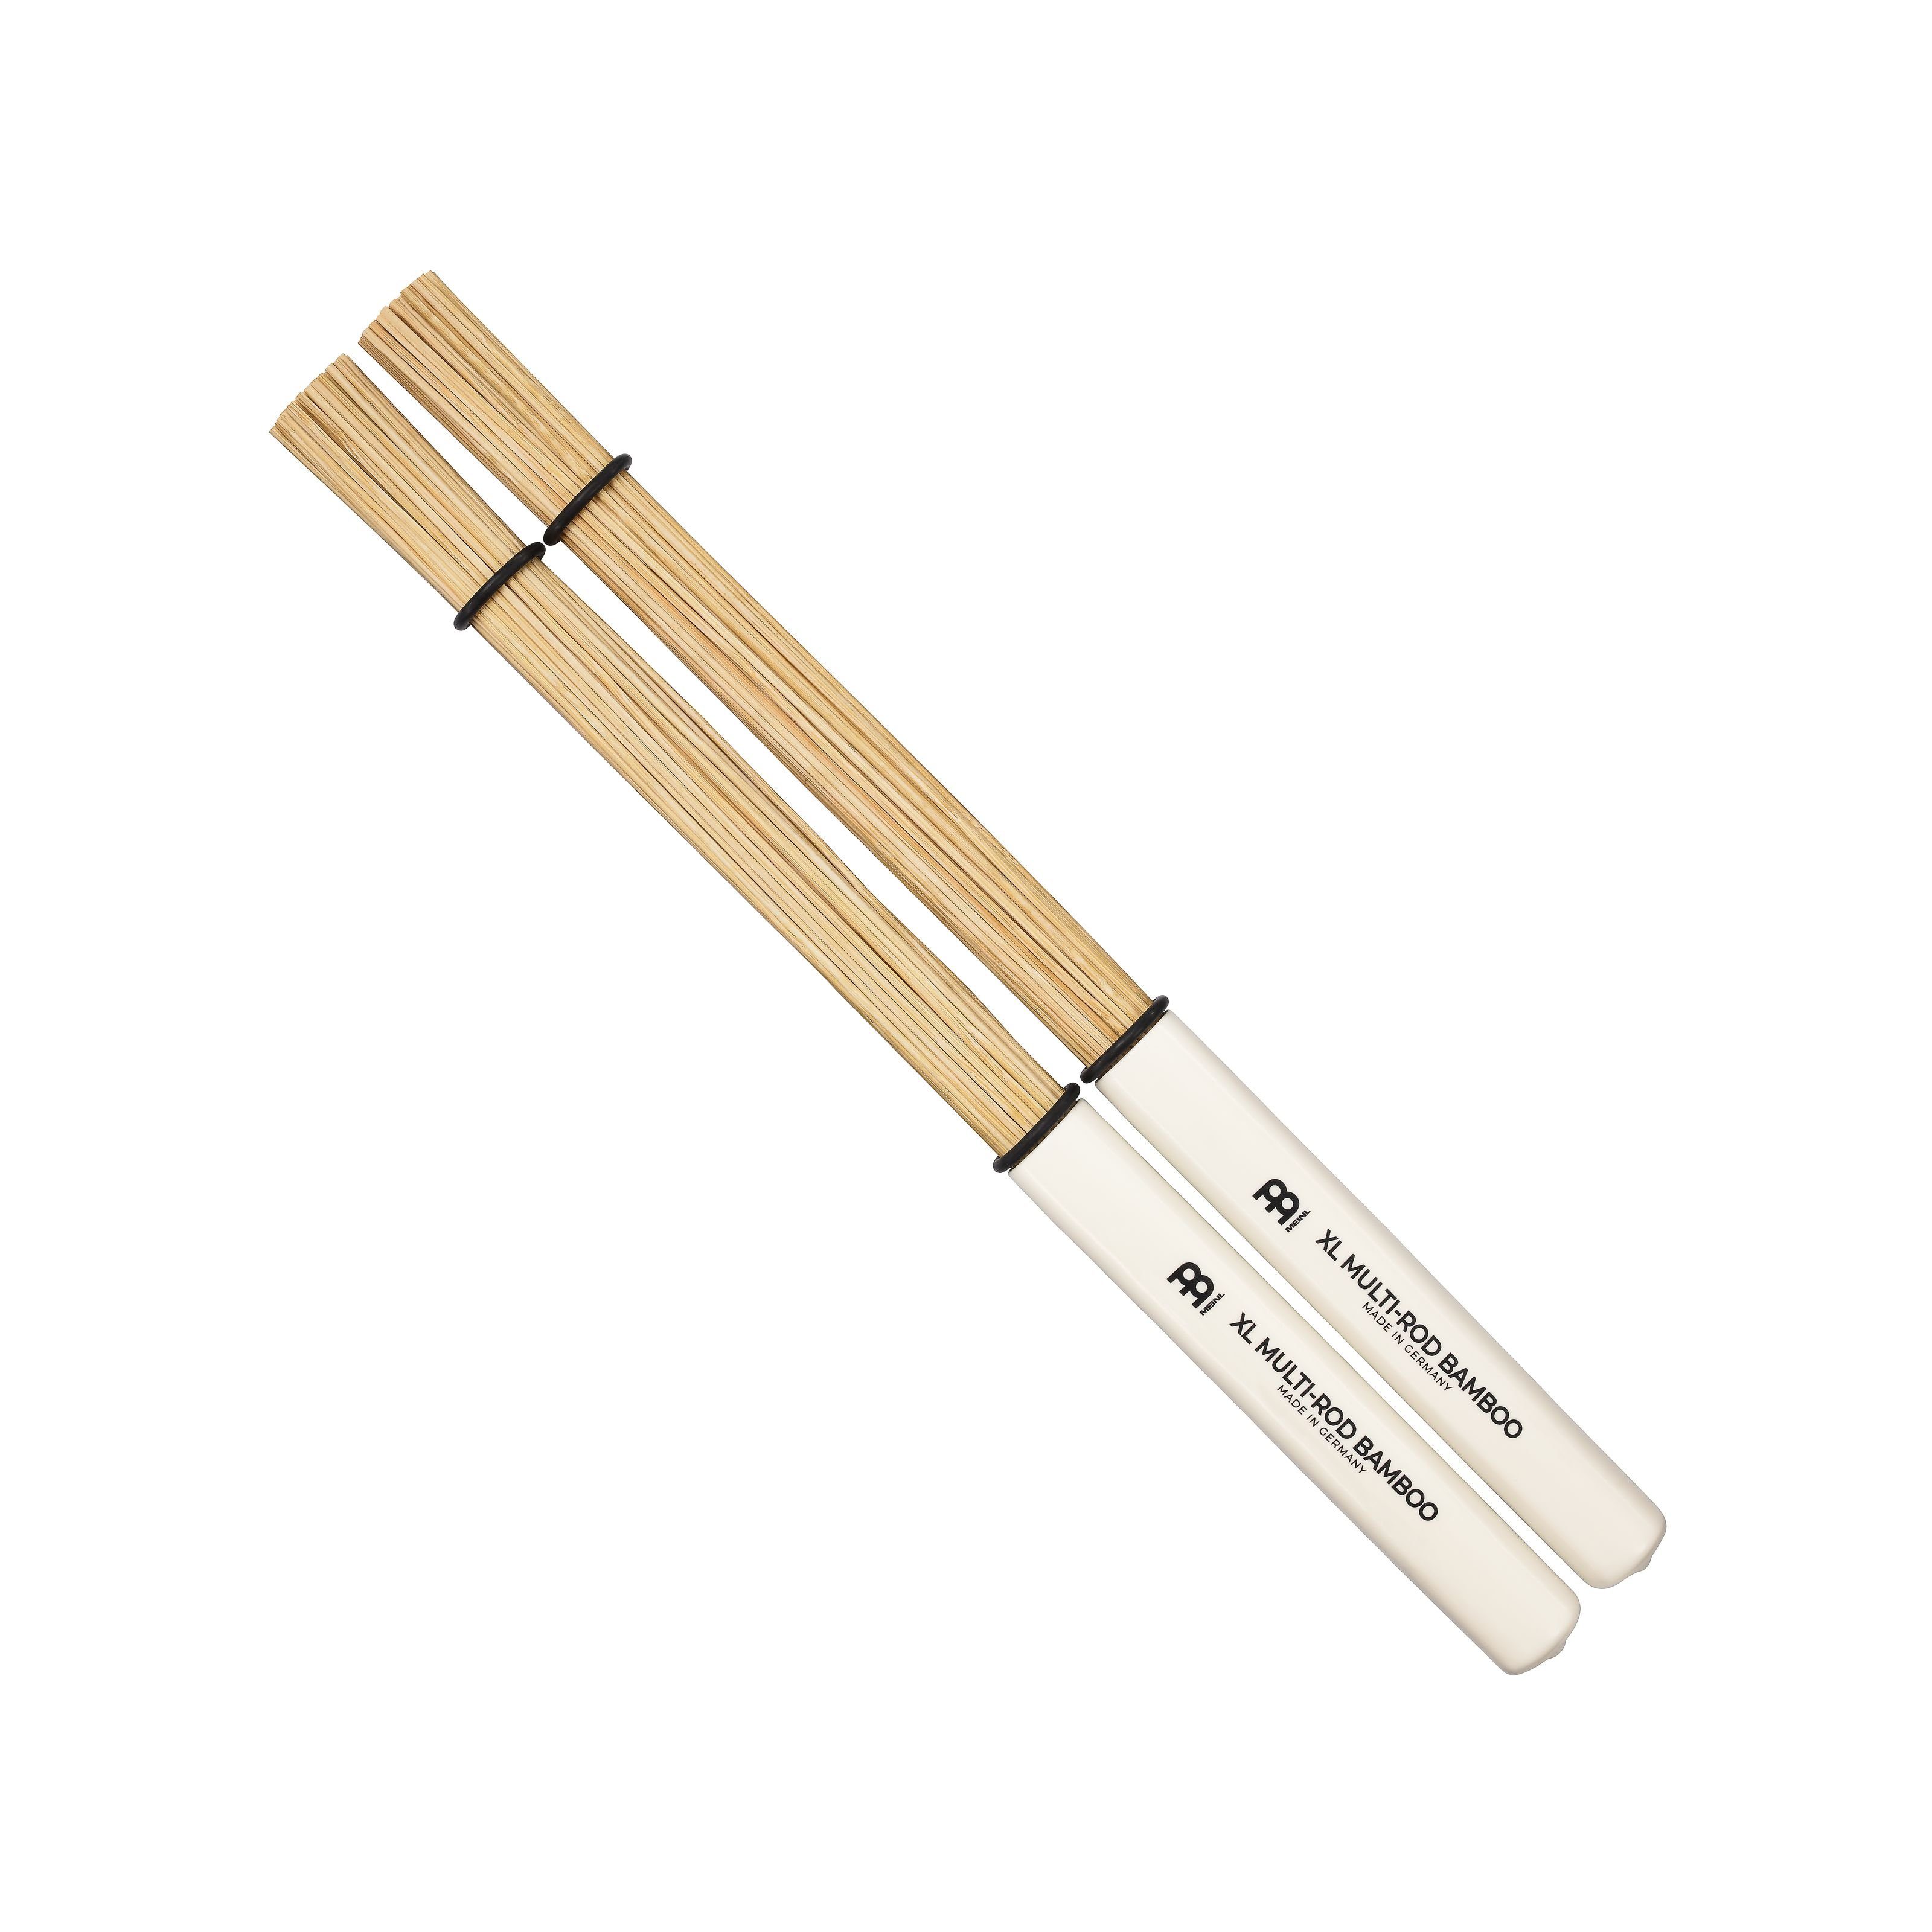 Meinl Percussion Rods (Bamboo XL Multi Rods, Sticks, Beater und Mallets, Hot Rods), Bamboo XL Multi Rods - Hot Rod